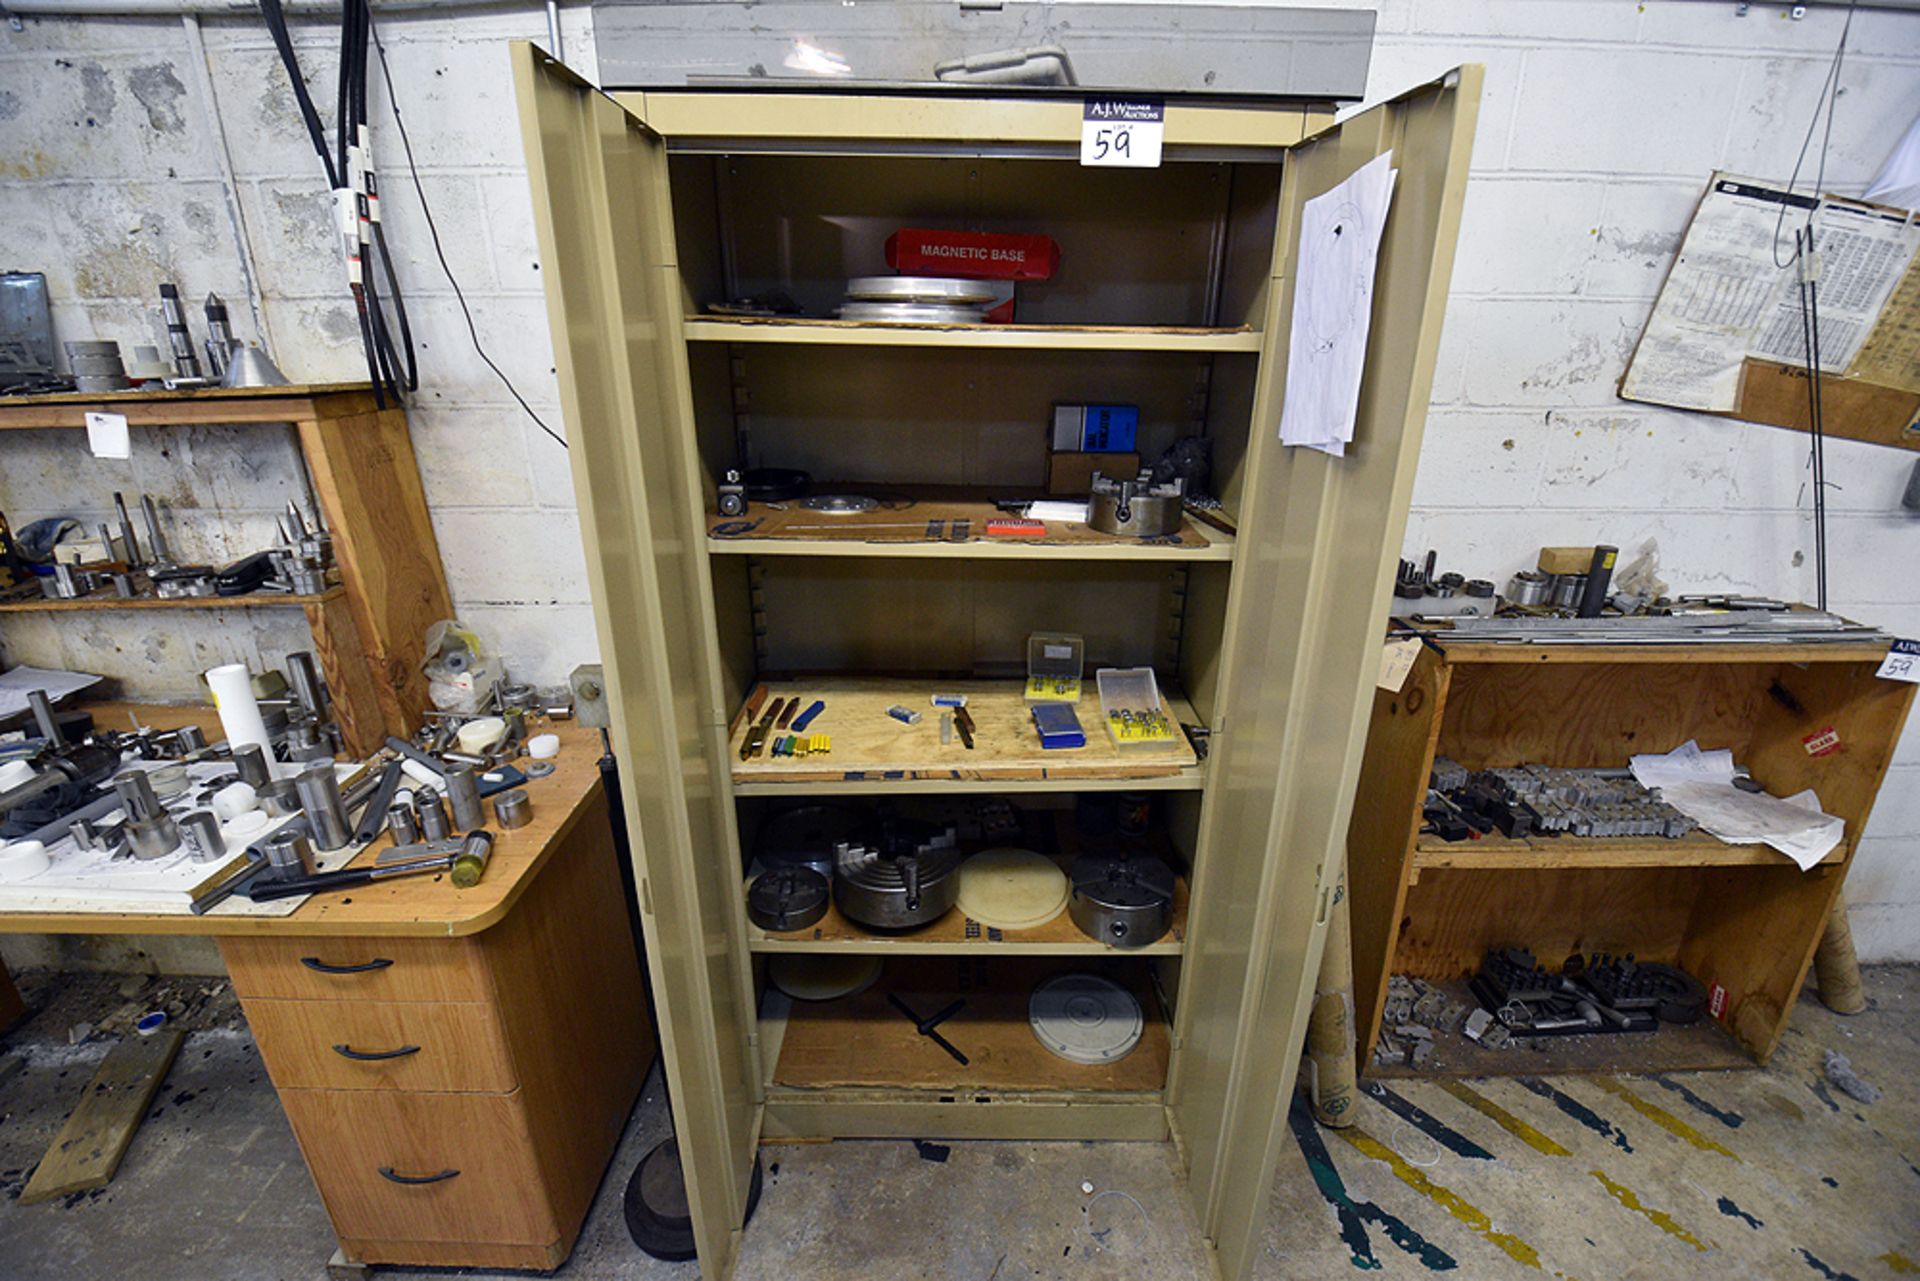 Contents of Work Area (Ass't Chucks, Drill Bits, Bench Vise, Arbor Press, Cabinet, Work Benches, - Image 8 of 15